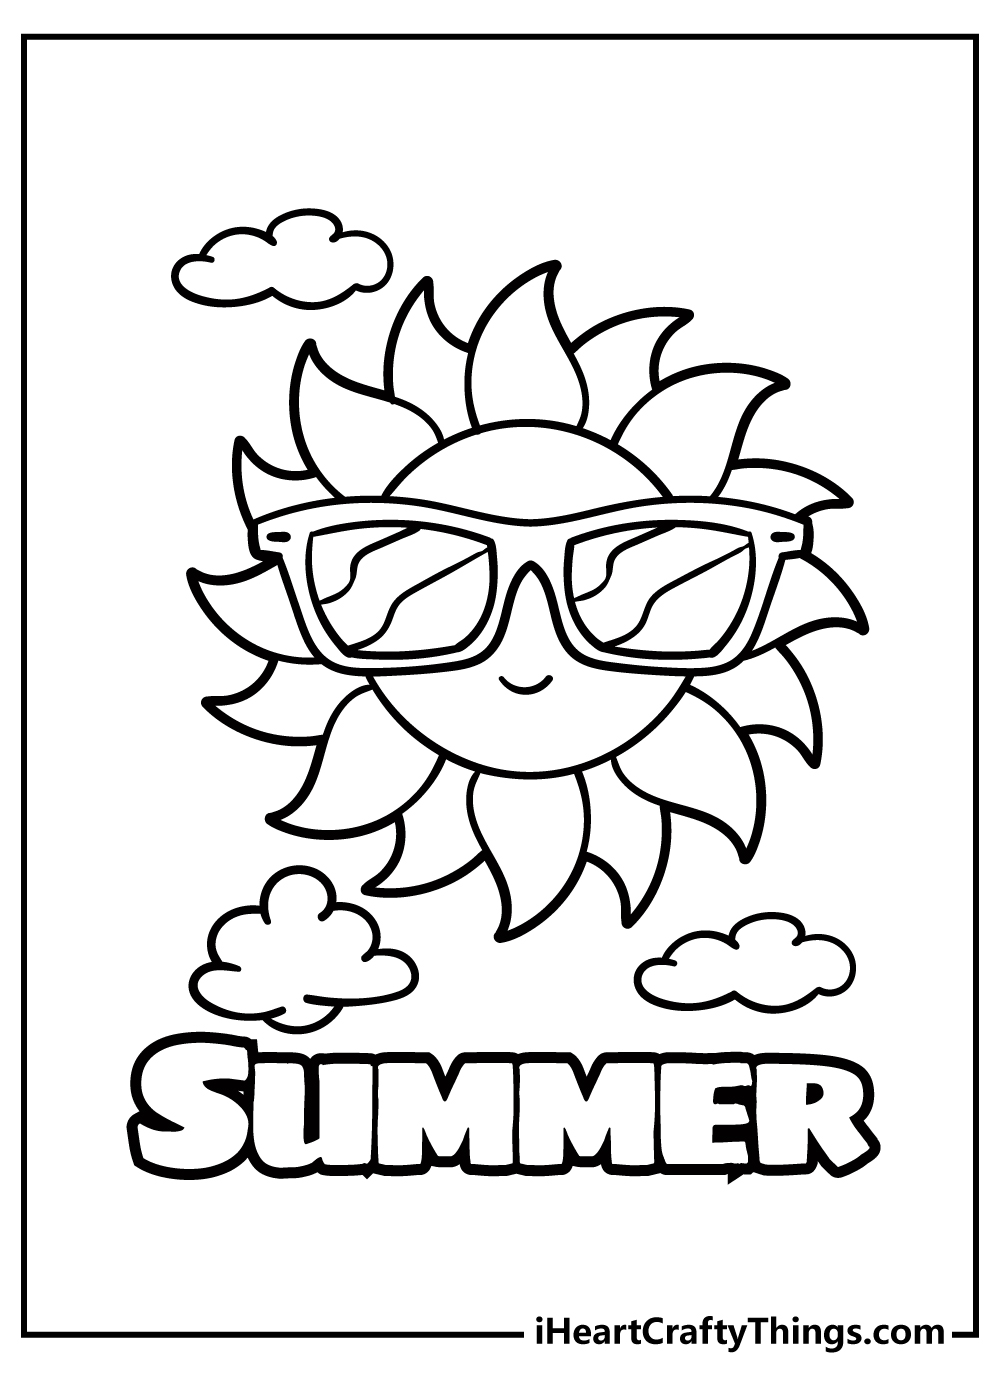 Summer Coloring Pages for kids free download